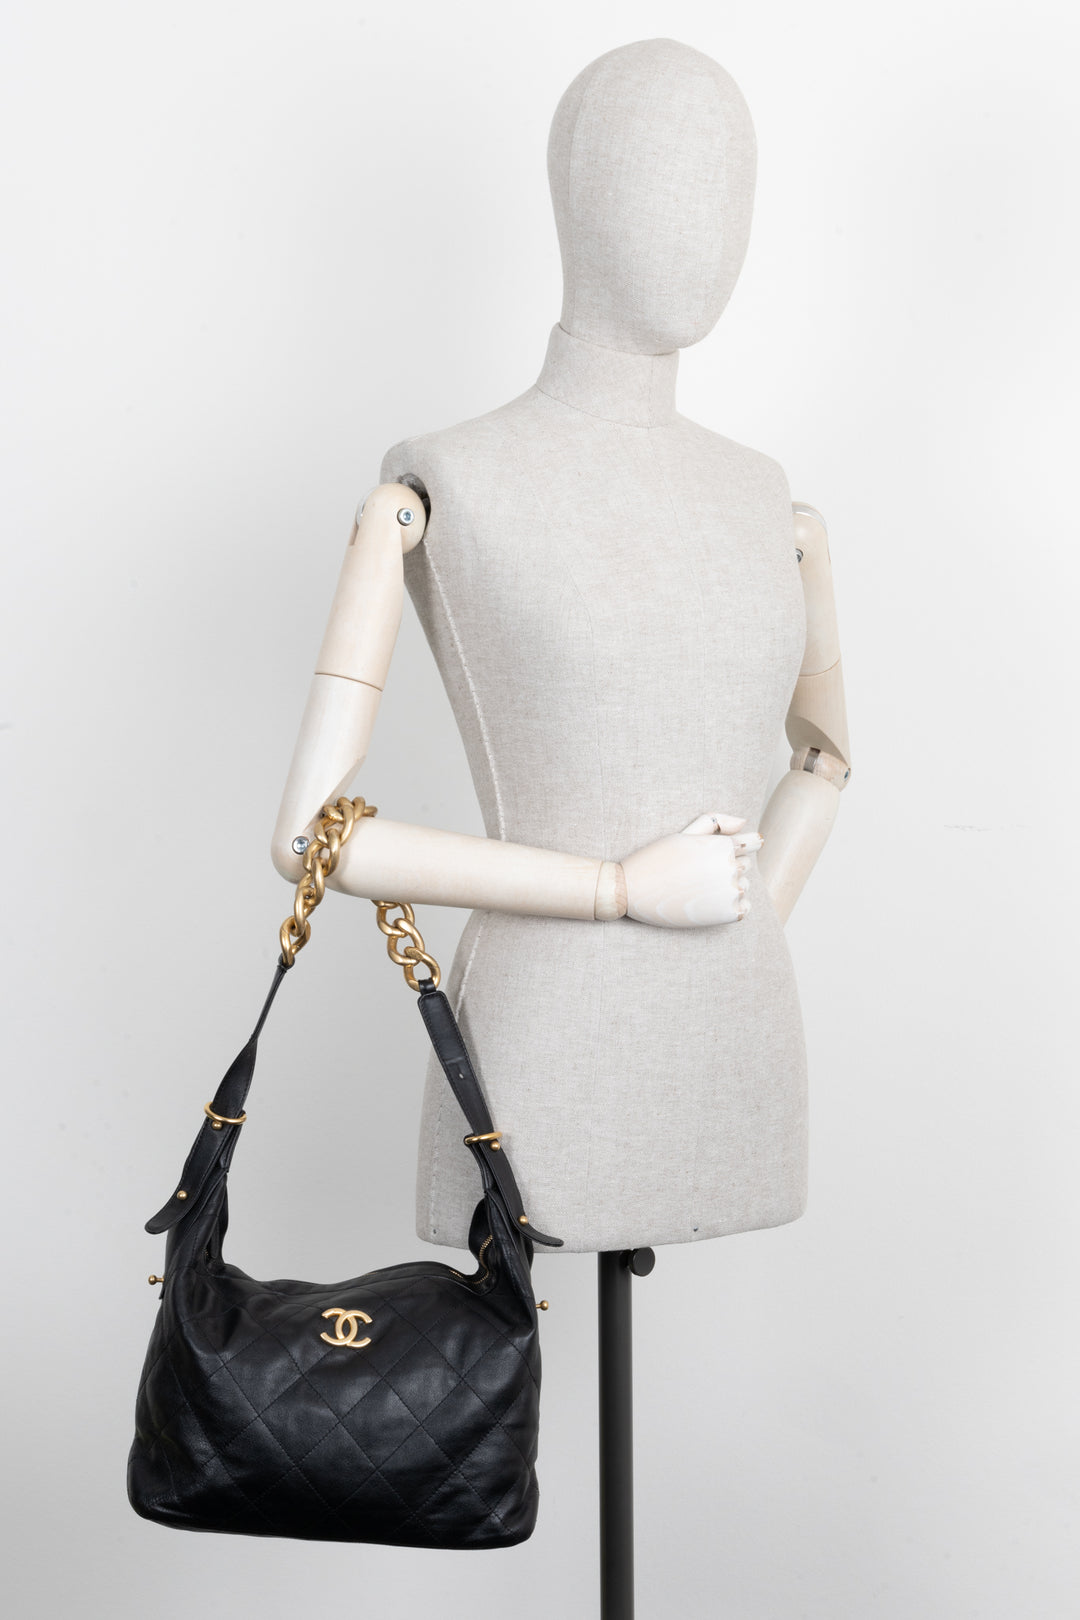 CHANEL Daily Belted Chain Hobo Bag Black